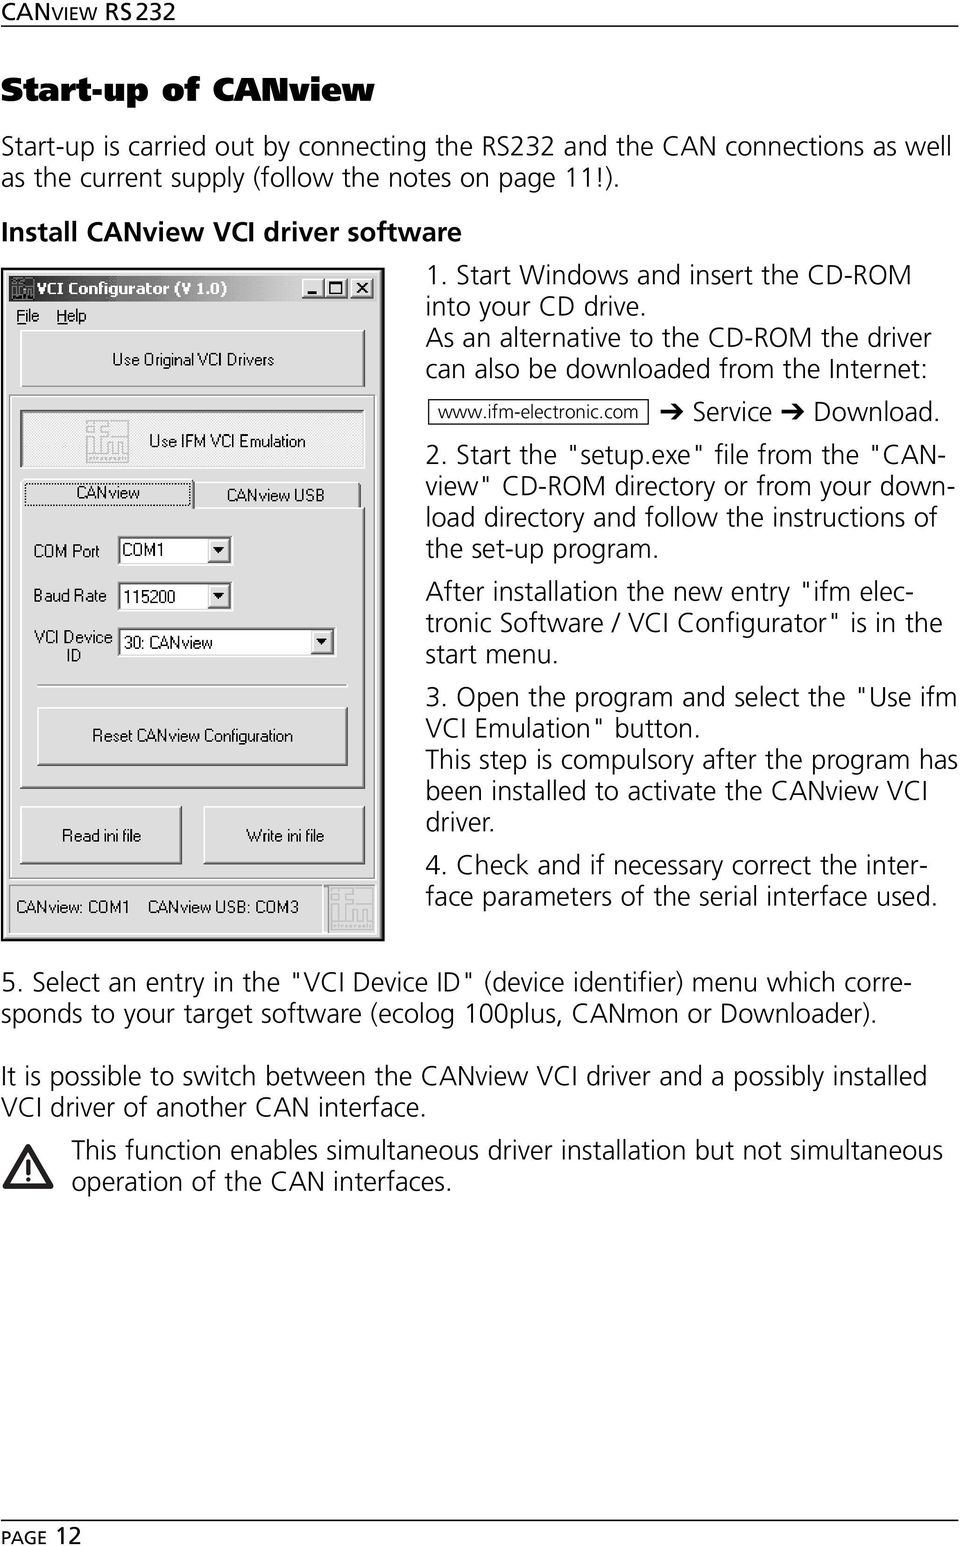 Start the "setup.exe" file from the "CANview" CD-ROM directory or from your download directory and follow the instructions of the set-up program.